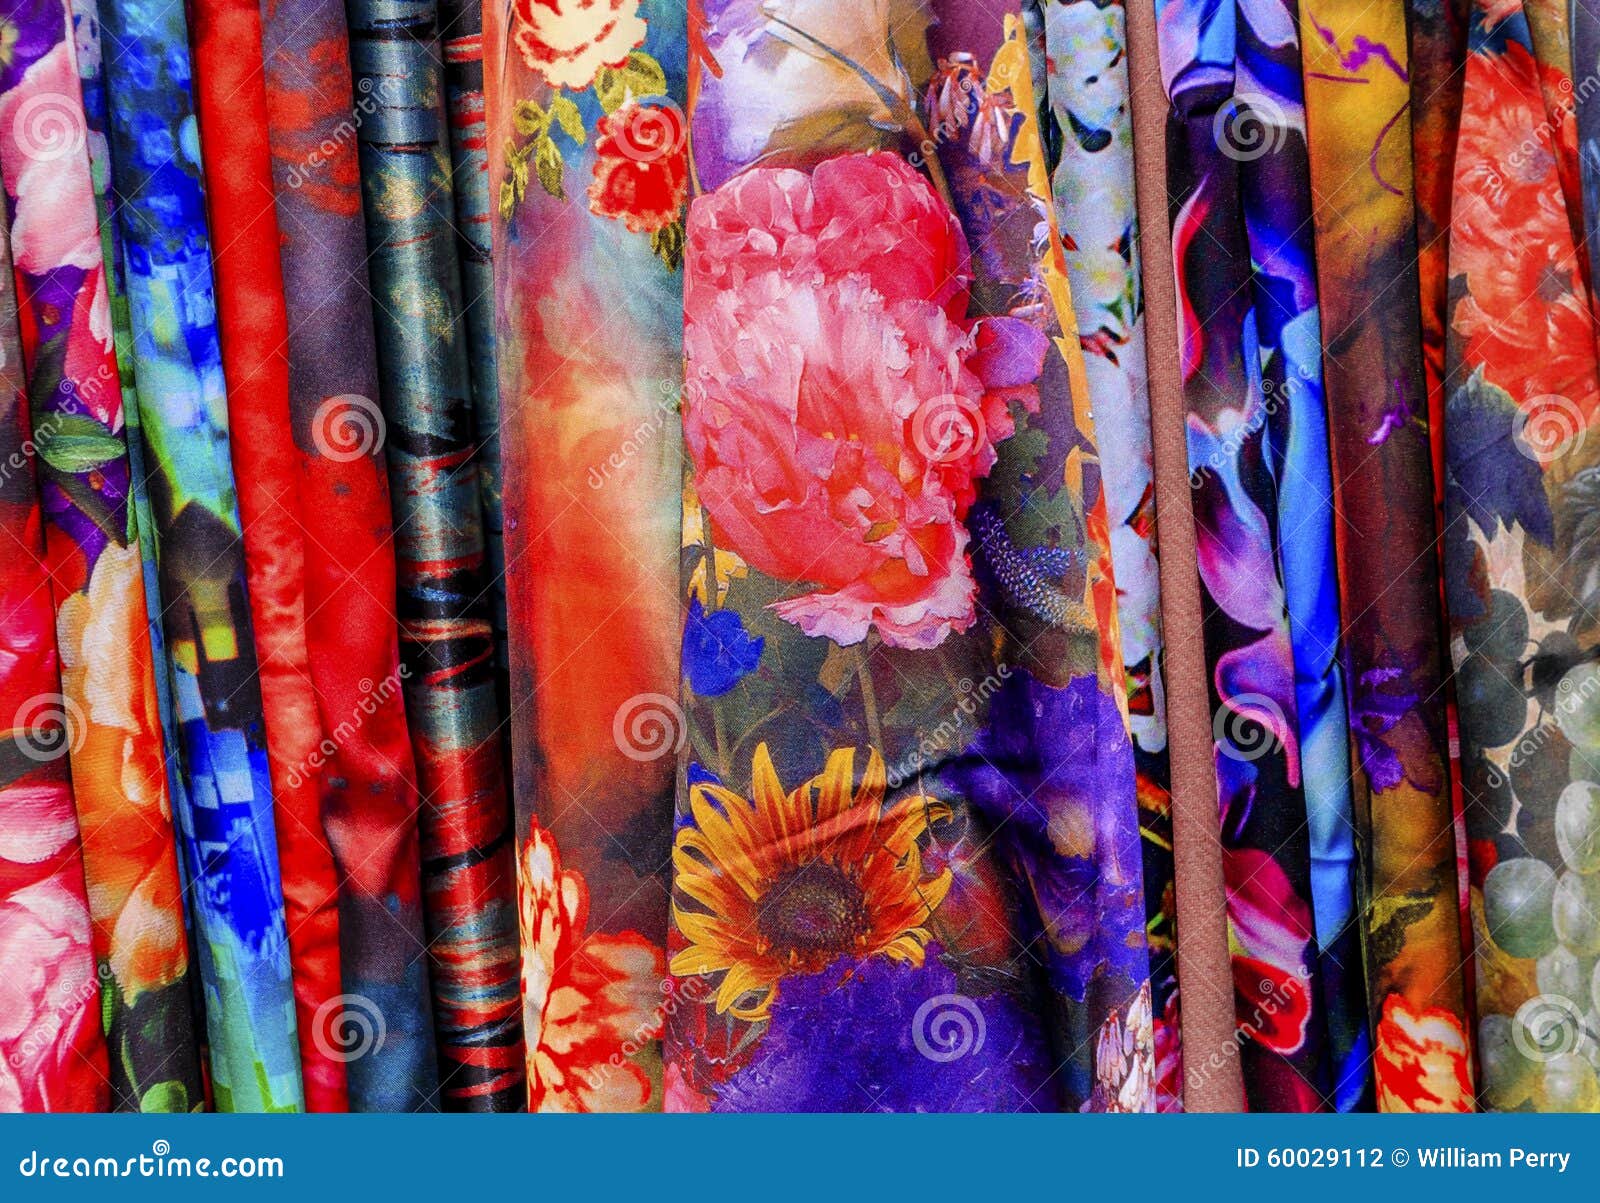 Chinese Colorful Flower Silk Scarves Yuyuan Shanghai China Stock Photo ...